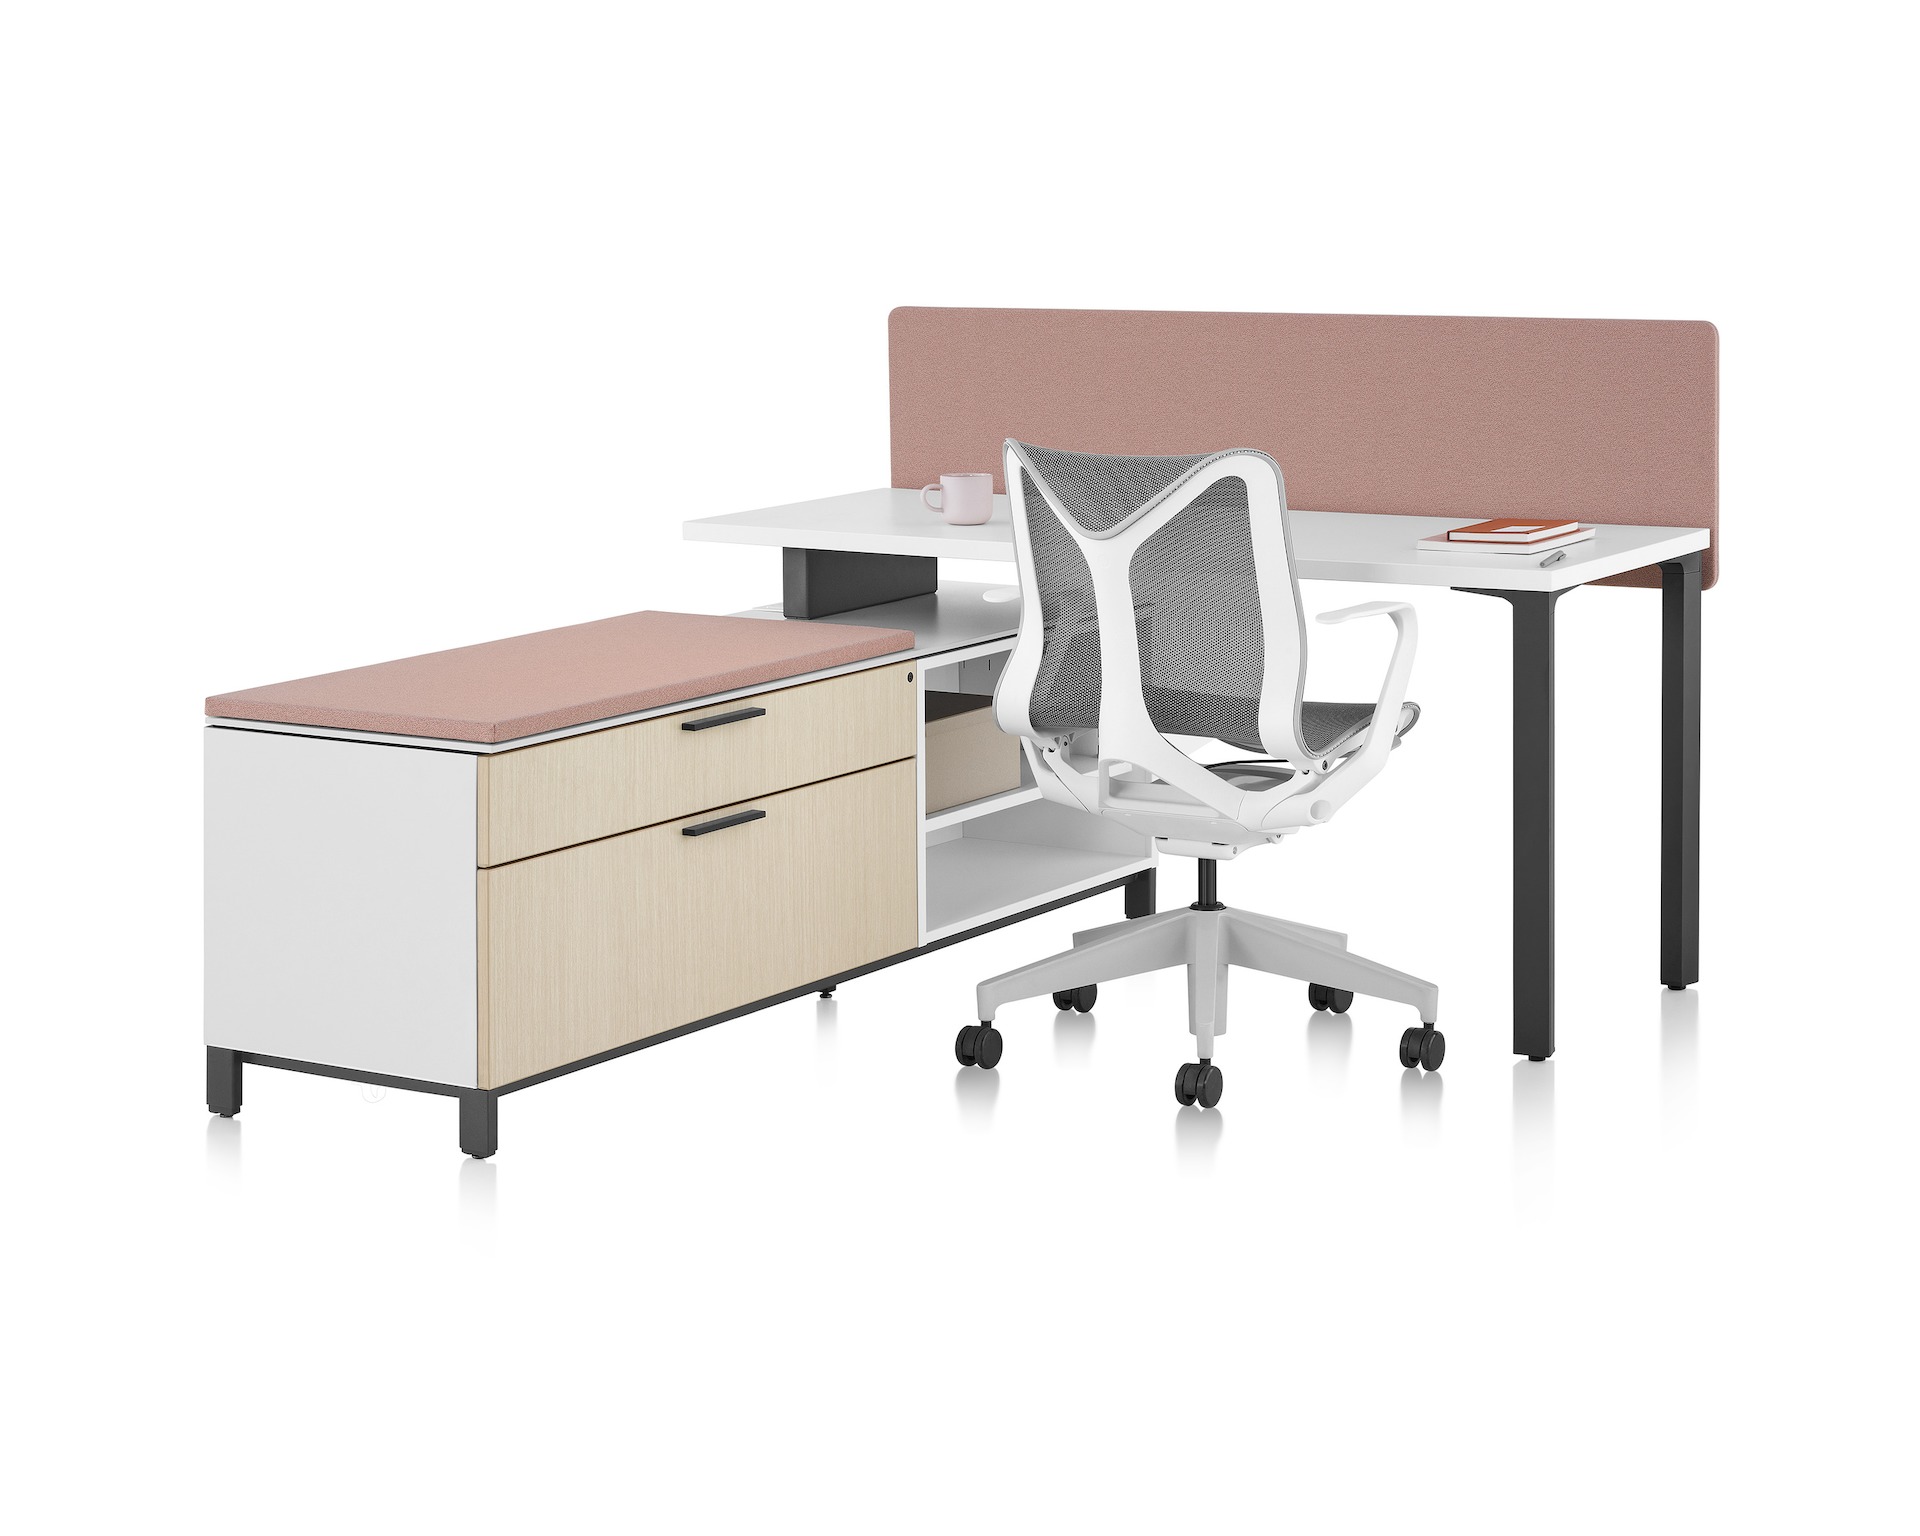 Canvas Storage workstation with a white surface, pink screen, and graphite legs.